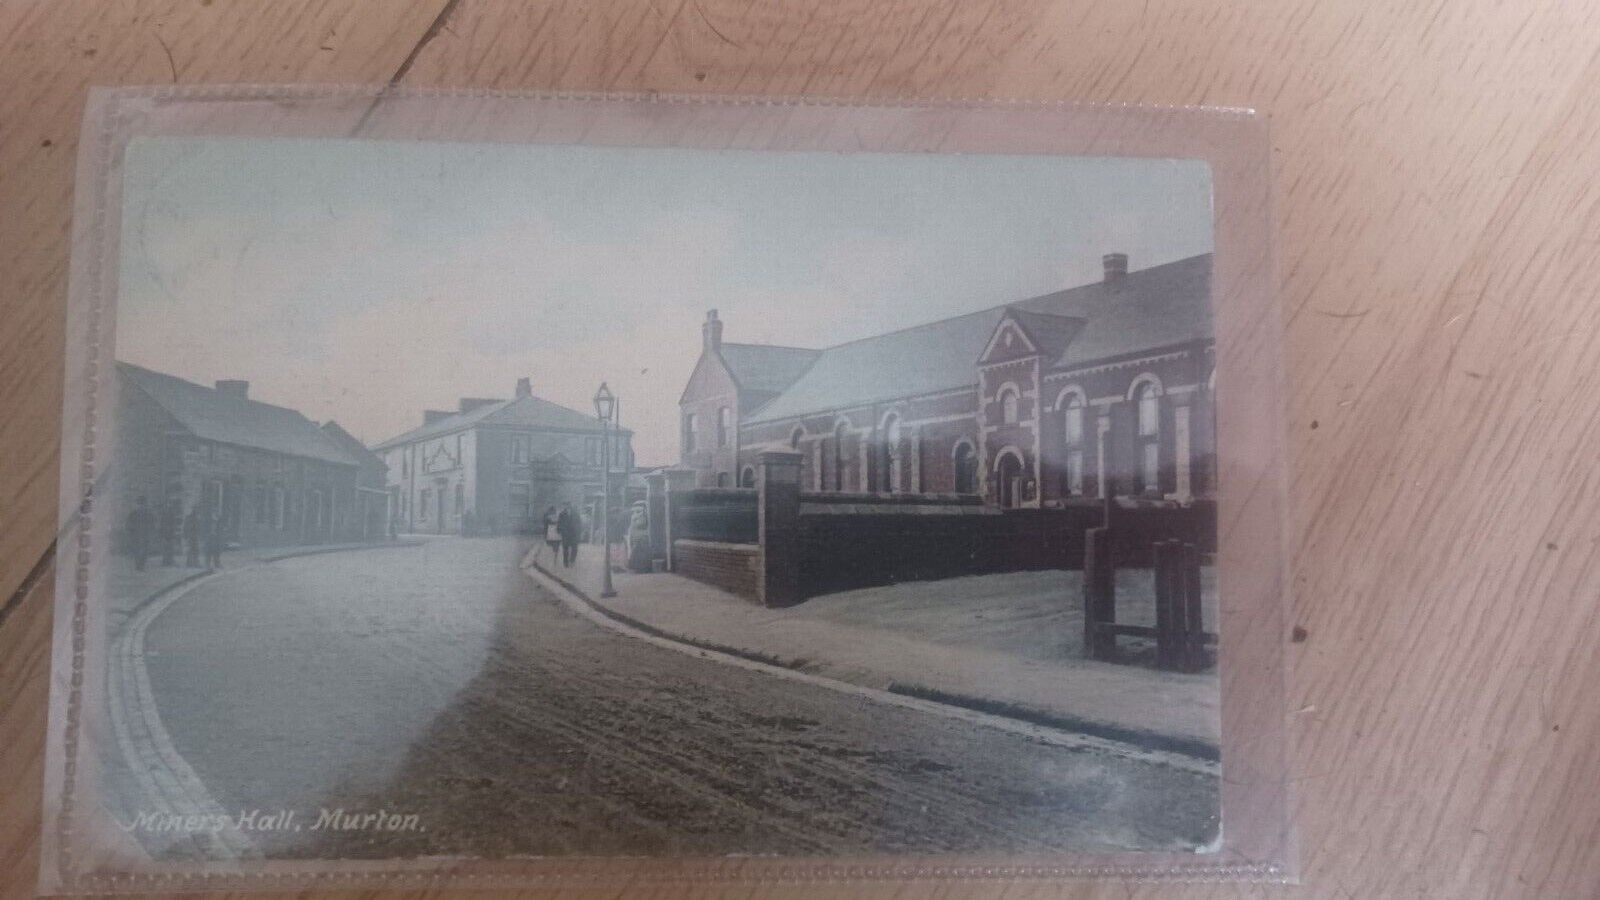 House Clearance - Vintage Service Miners Hall, Murton, Durham Coal Mining